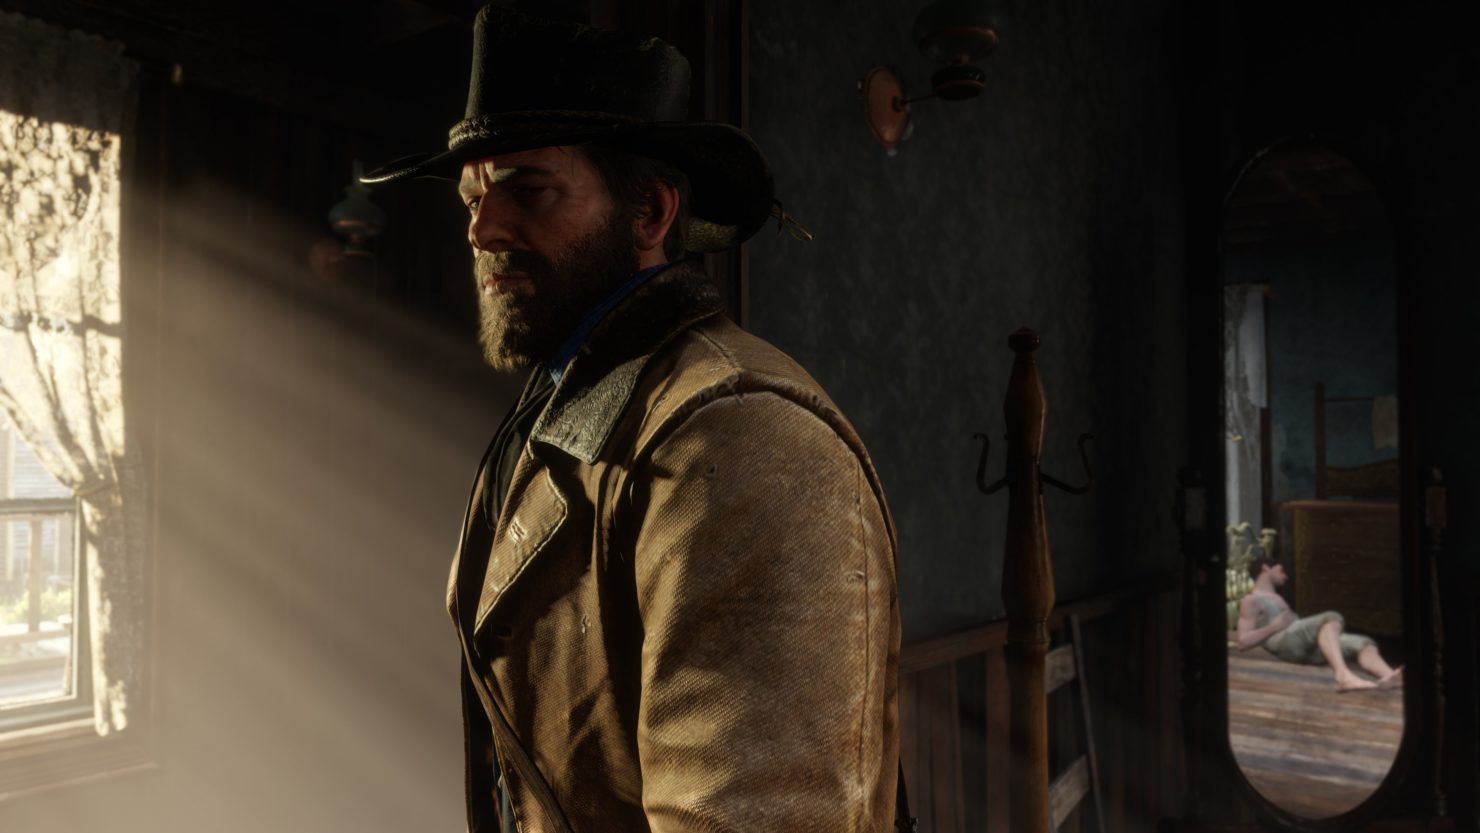 How could Red Dead Redemption 2 improve on PC?